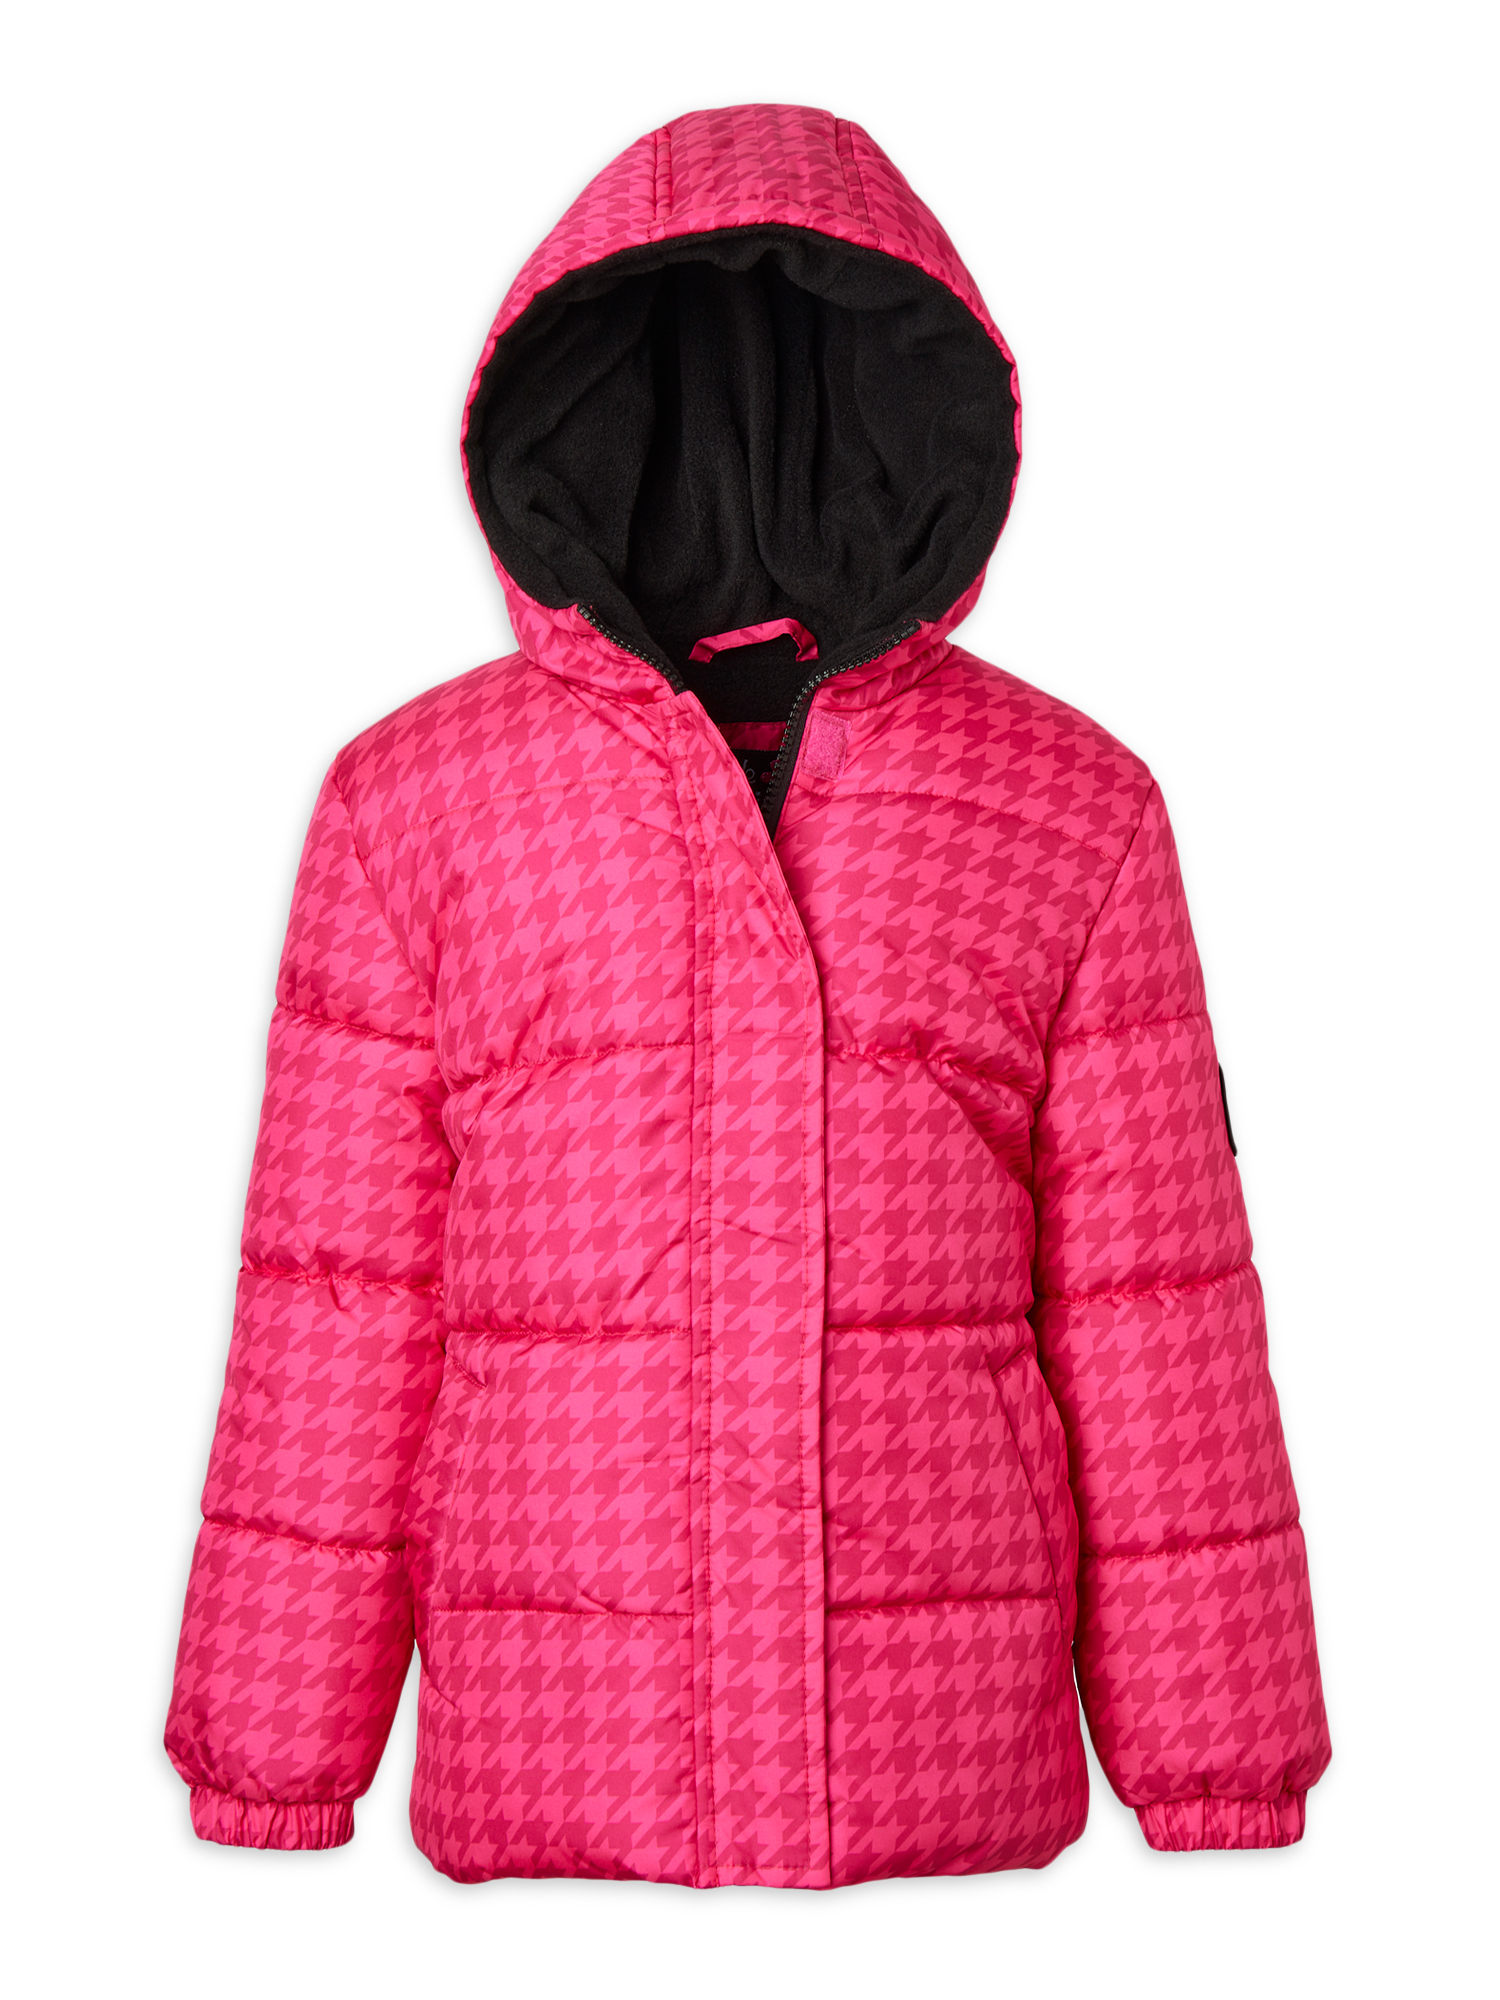 Pink Platinum Girls' Hooded Houndstooth Winter Puffer Coat, Sizes 4-16 - image 2 of 2